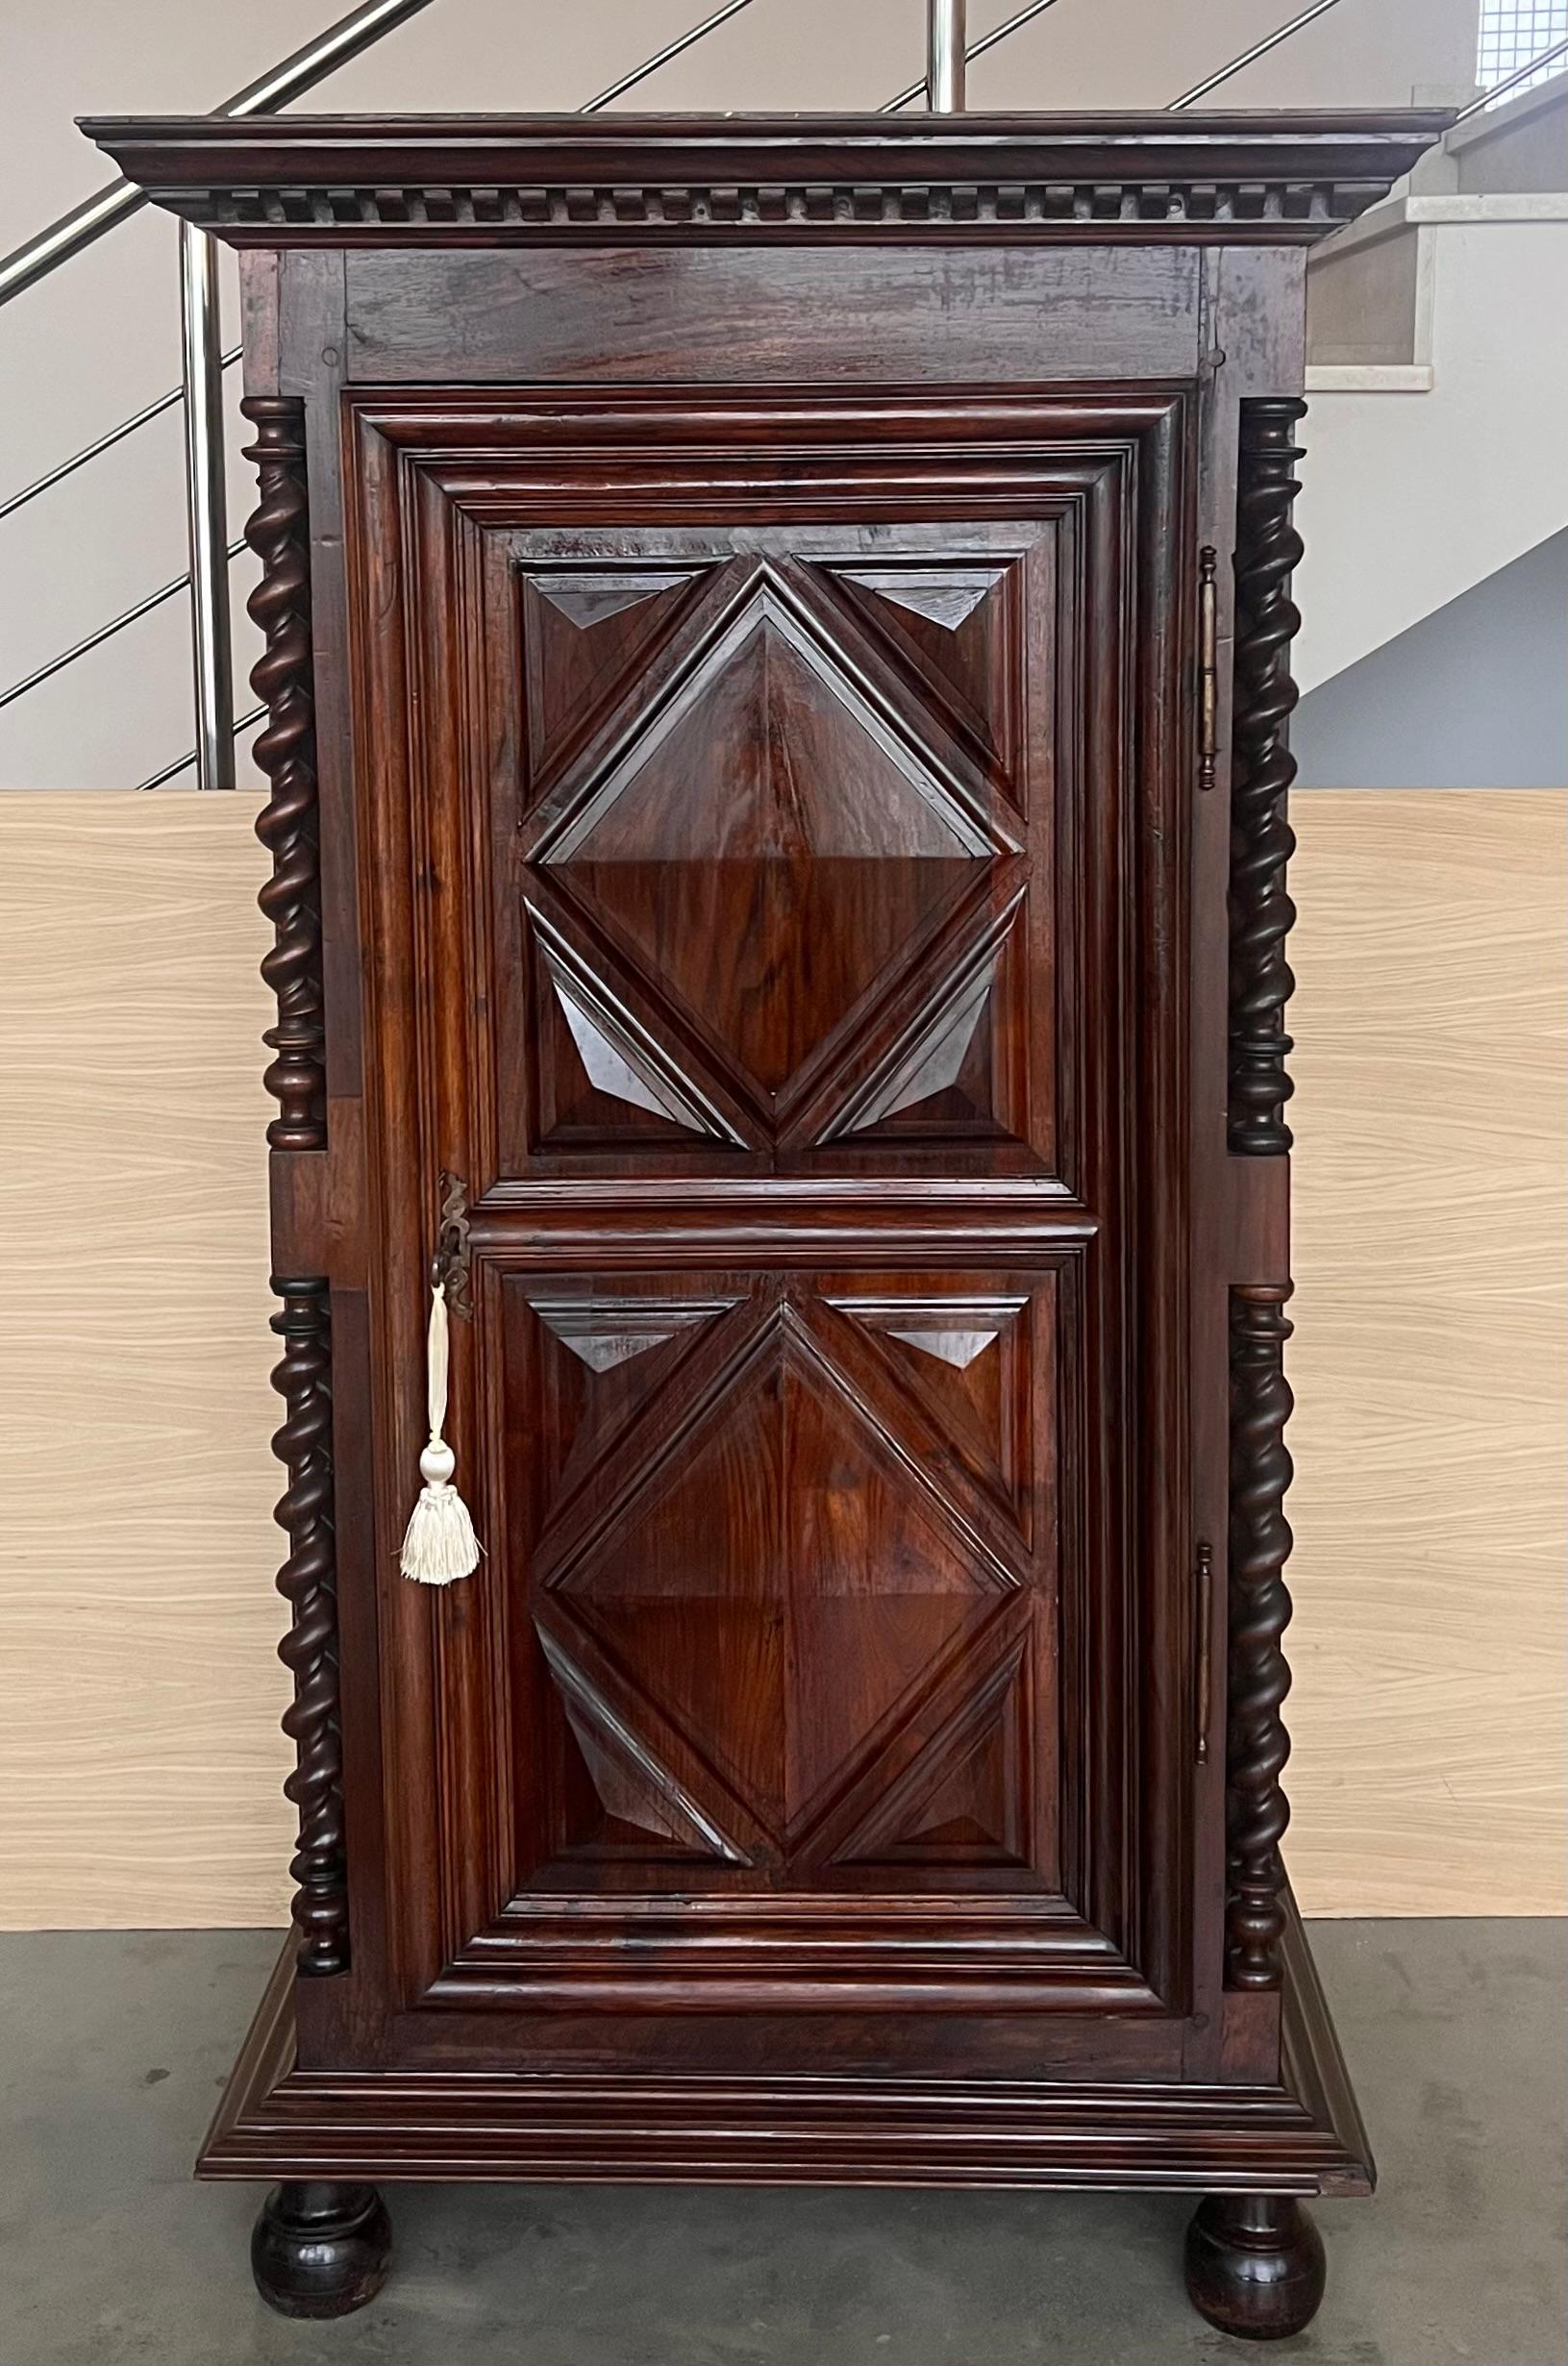 An exquisite Dutch cushion cabinet with two doors. This cupboard takes its name from the pillow-shaped thickenings on the doors. The doors are flanked by semicircular ebony veneered columns. 
This cabinet is made of the finest quality walnut and is